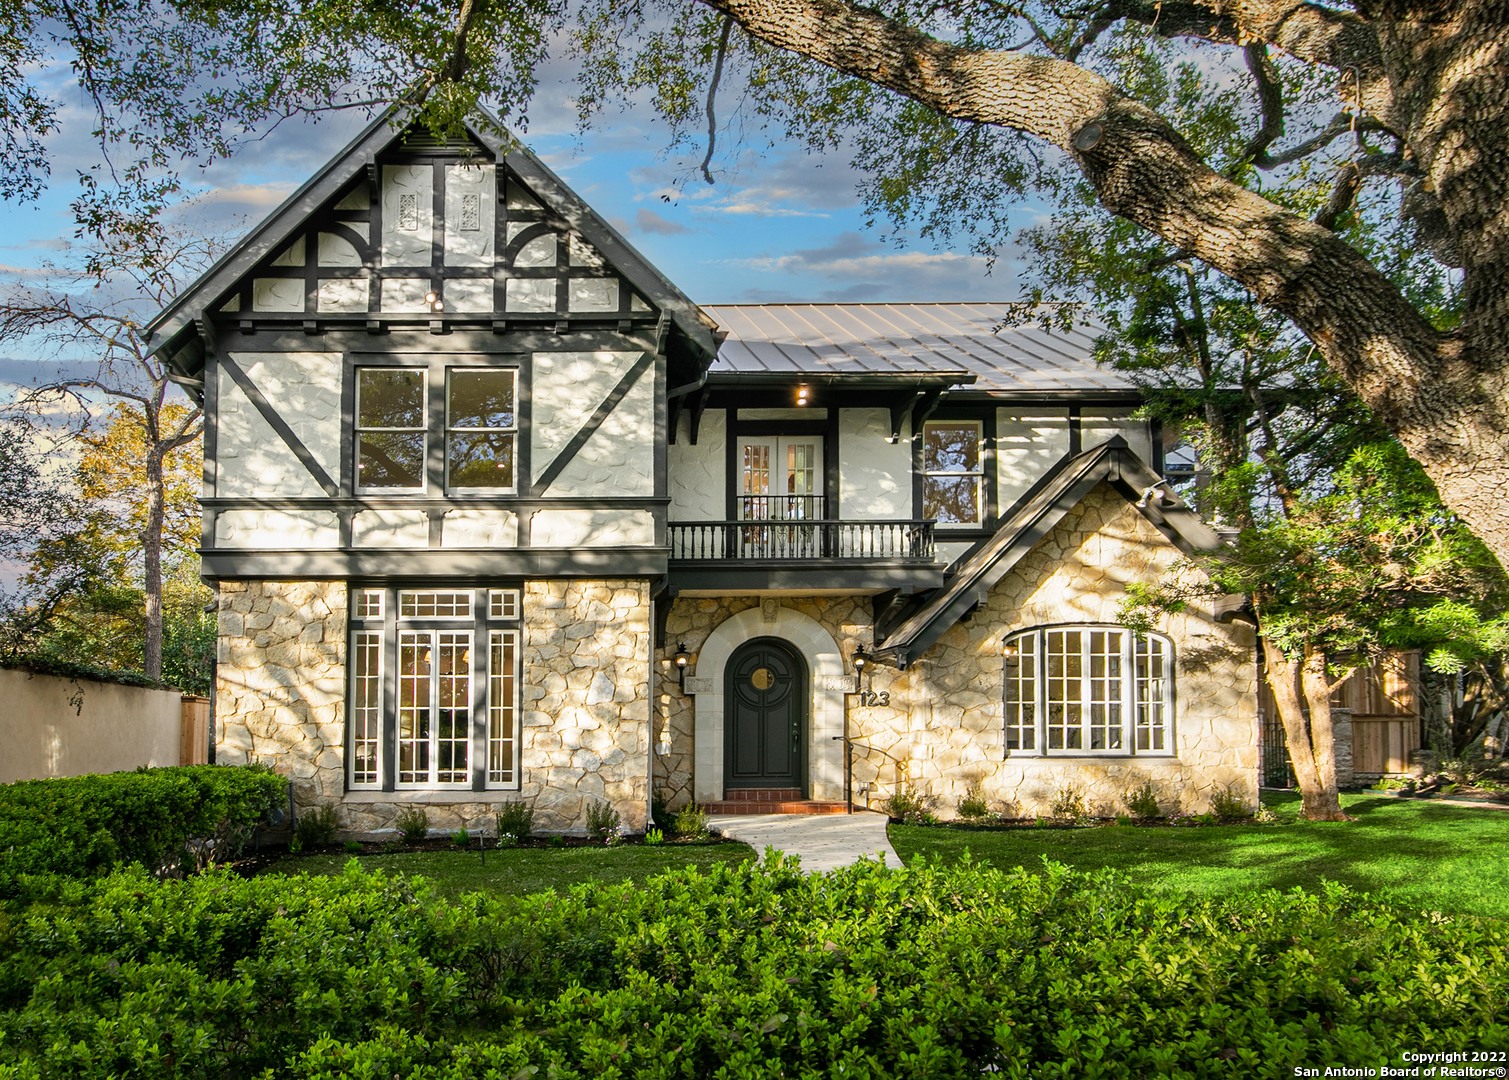 Reviving a Revival: The Reimagining of a Grand Terrell Hills Tudor  Seldom do you see a historic property of this caliber and size that has been beautifully restored. A true collaborative work of art, this extensive renovation project is presented on Geneseo, the most prestigious street in Terrell Hills. Designer driven interior changes have transformed this 1920's stone and stucco Tudor style estate originally built by John Hagy.  The premier property features 5 bedrooms, 4.5 baths plus a separate casita with full bath and attached 3 car garage. Stunning, new state of the art culinary kitchen with Viking appliances, Waterstone faucets, quartzite counters and sleek custom cabinetry plus hidden walk-in pantry storage and intimate wine /bourbon bar room with Hoshizaki ice maker and 2 drawer refrigerator chilling unit. Spectacular primary suite with marble counters, marble flooring, top of the line Rohl plumbing fixtures, Victoria and Albert soaking tub, walk-in shower with dual shower heads, dual vanities, Toto toilet, and dual walk-in closets with built-in shelving. Completely renovated guest bathrooms with marble counters and flooring. Amenities include beautifully refinished hardwood floors, period plaster walls and new decorator lighting. Brand new swimming pool installation with in-floor cleaning system, spa and pool deck fountain jets.